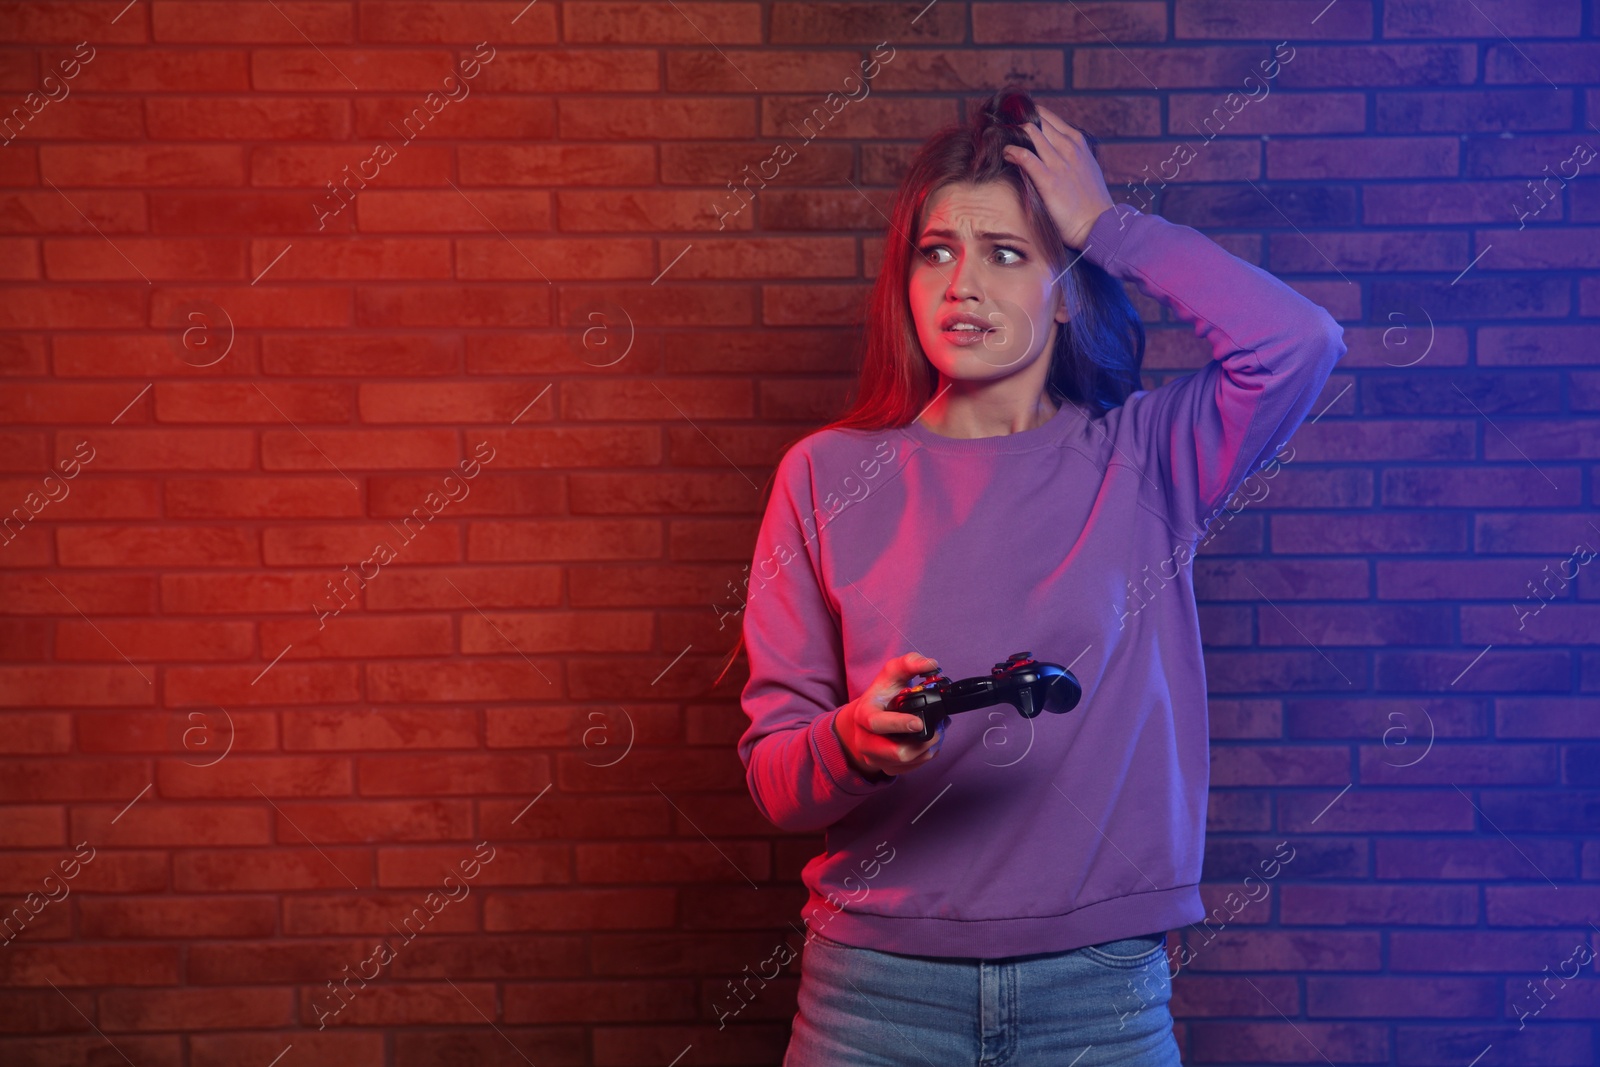 Photo of Emotional young woman playing video games with controller near brick wall. Space for text